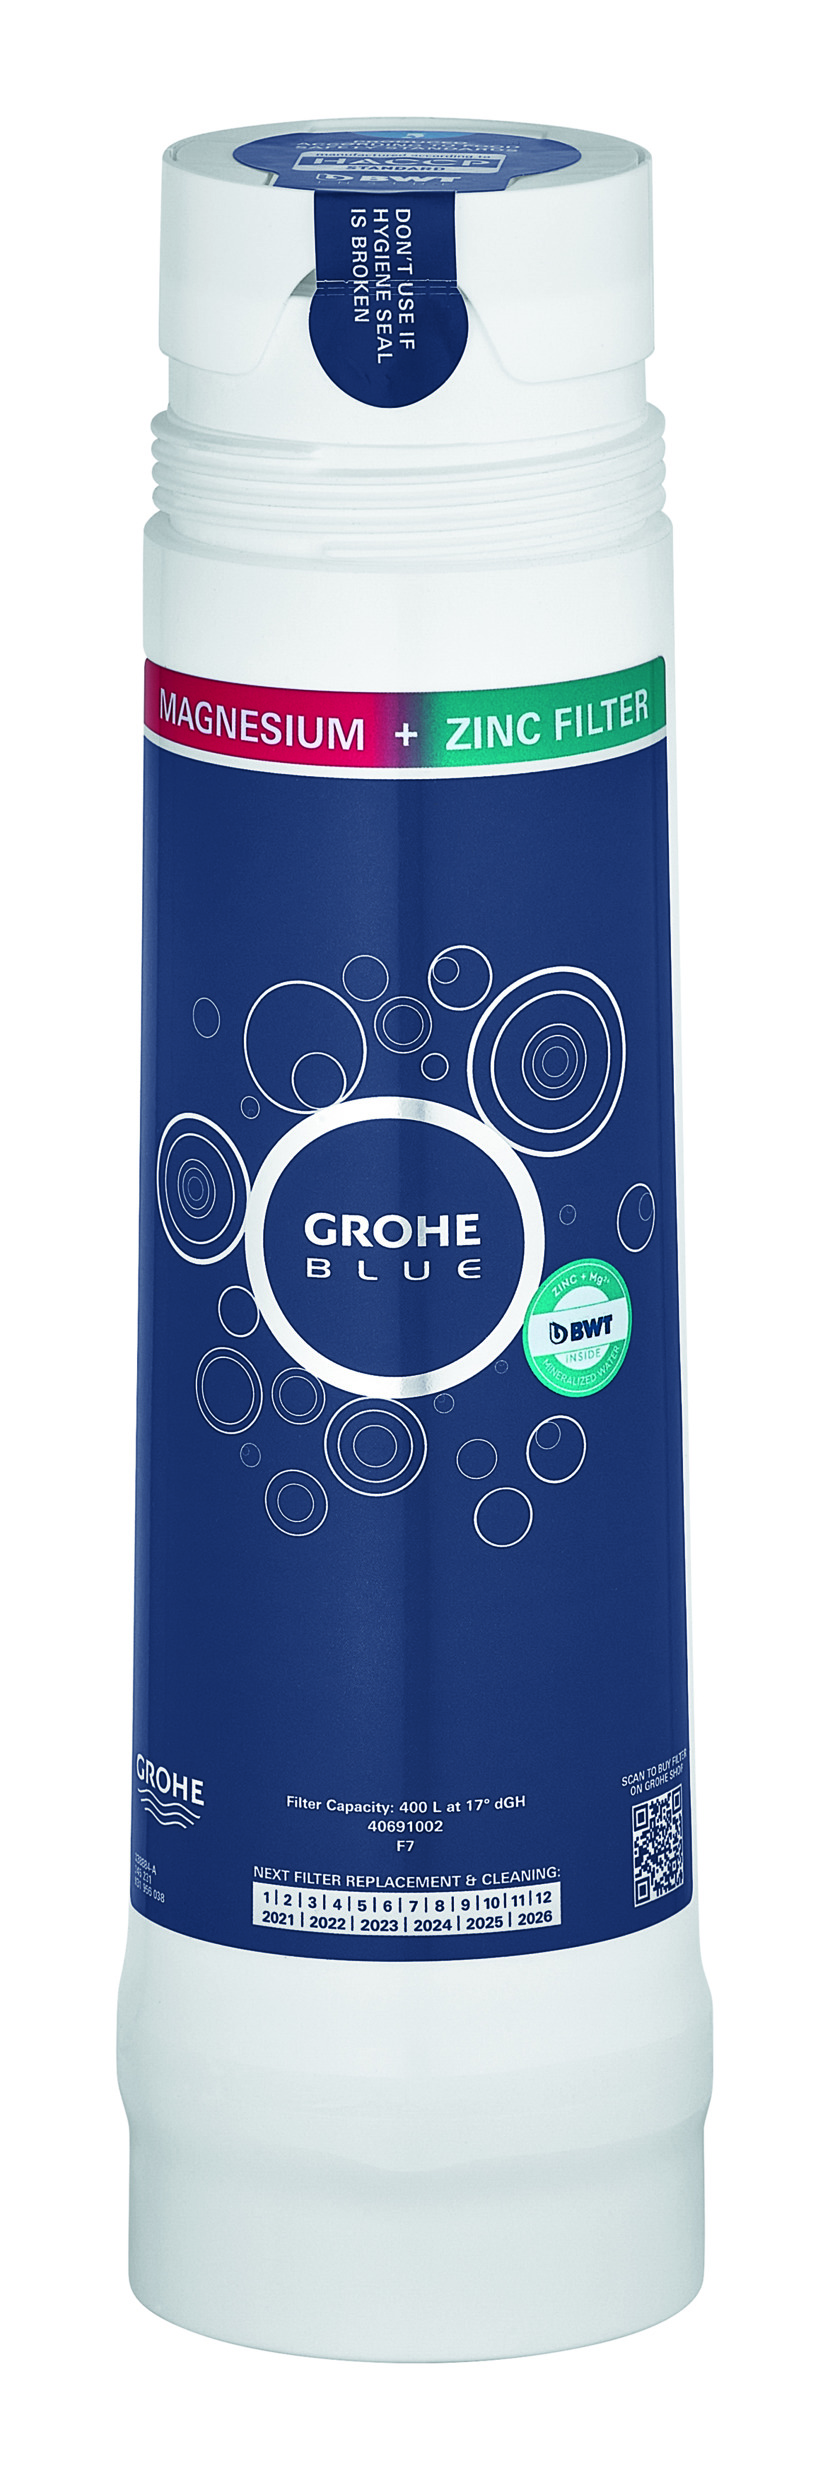 Grohe Blue Filter L